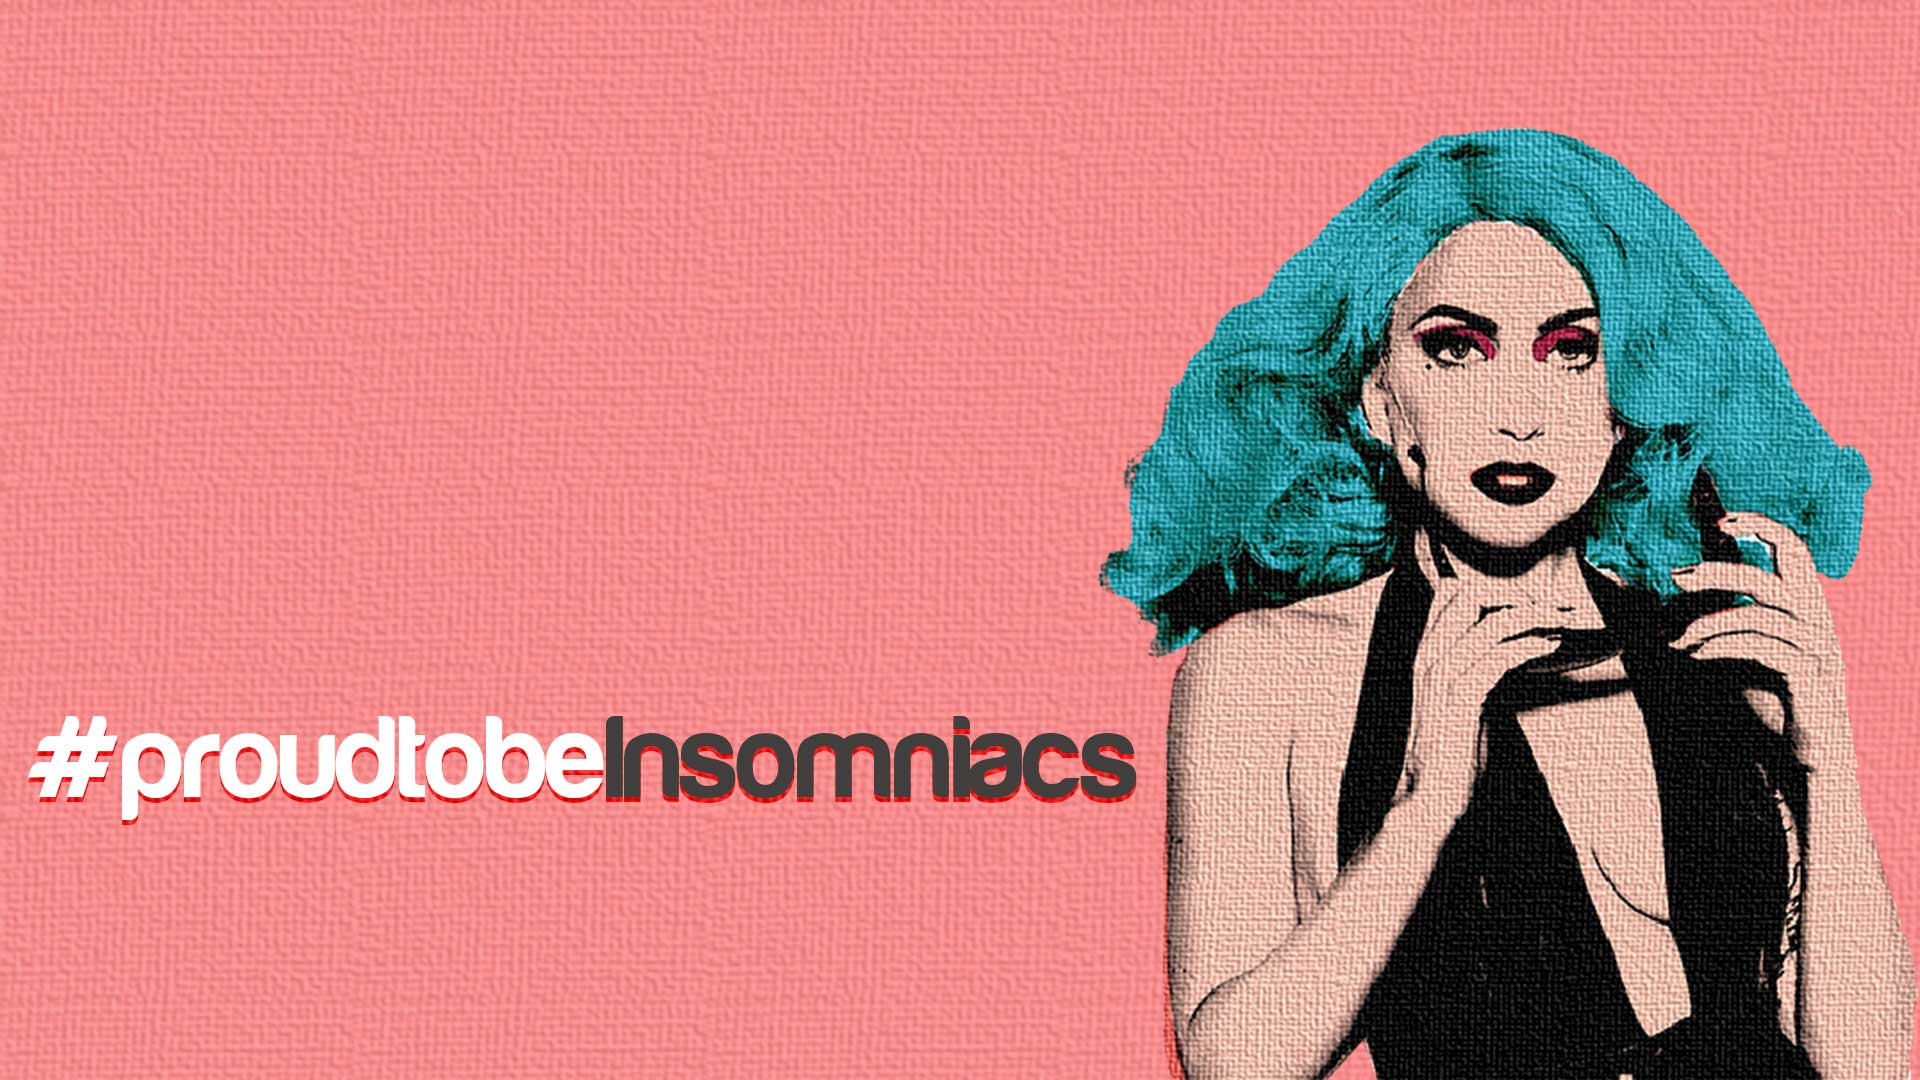 Famous insomniacs who are Celebrities!